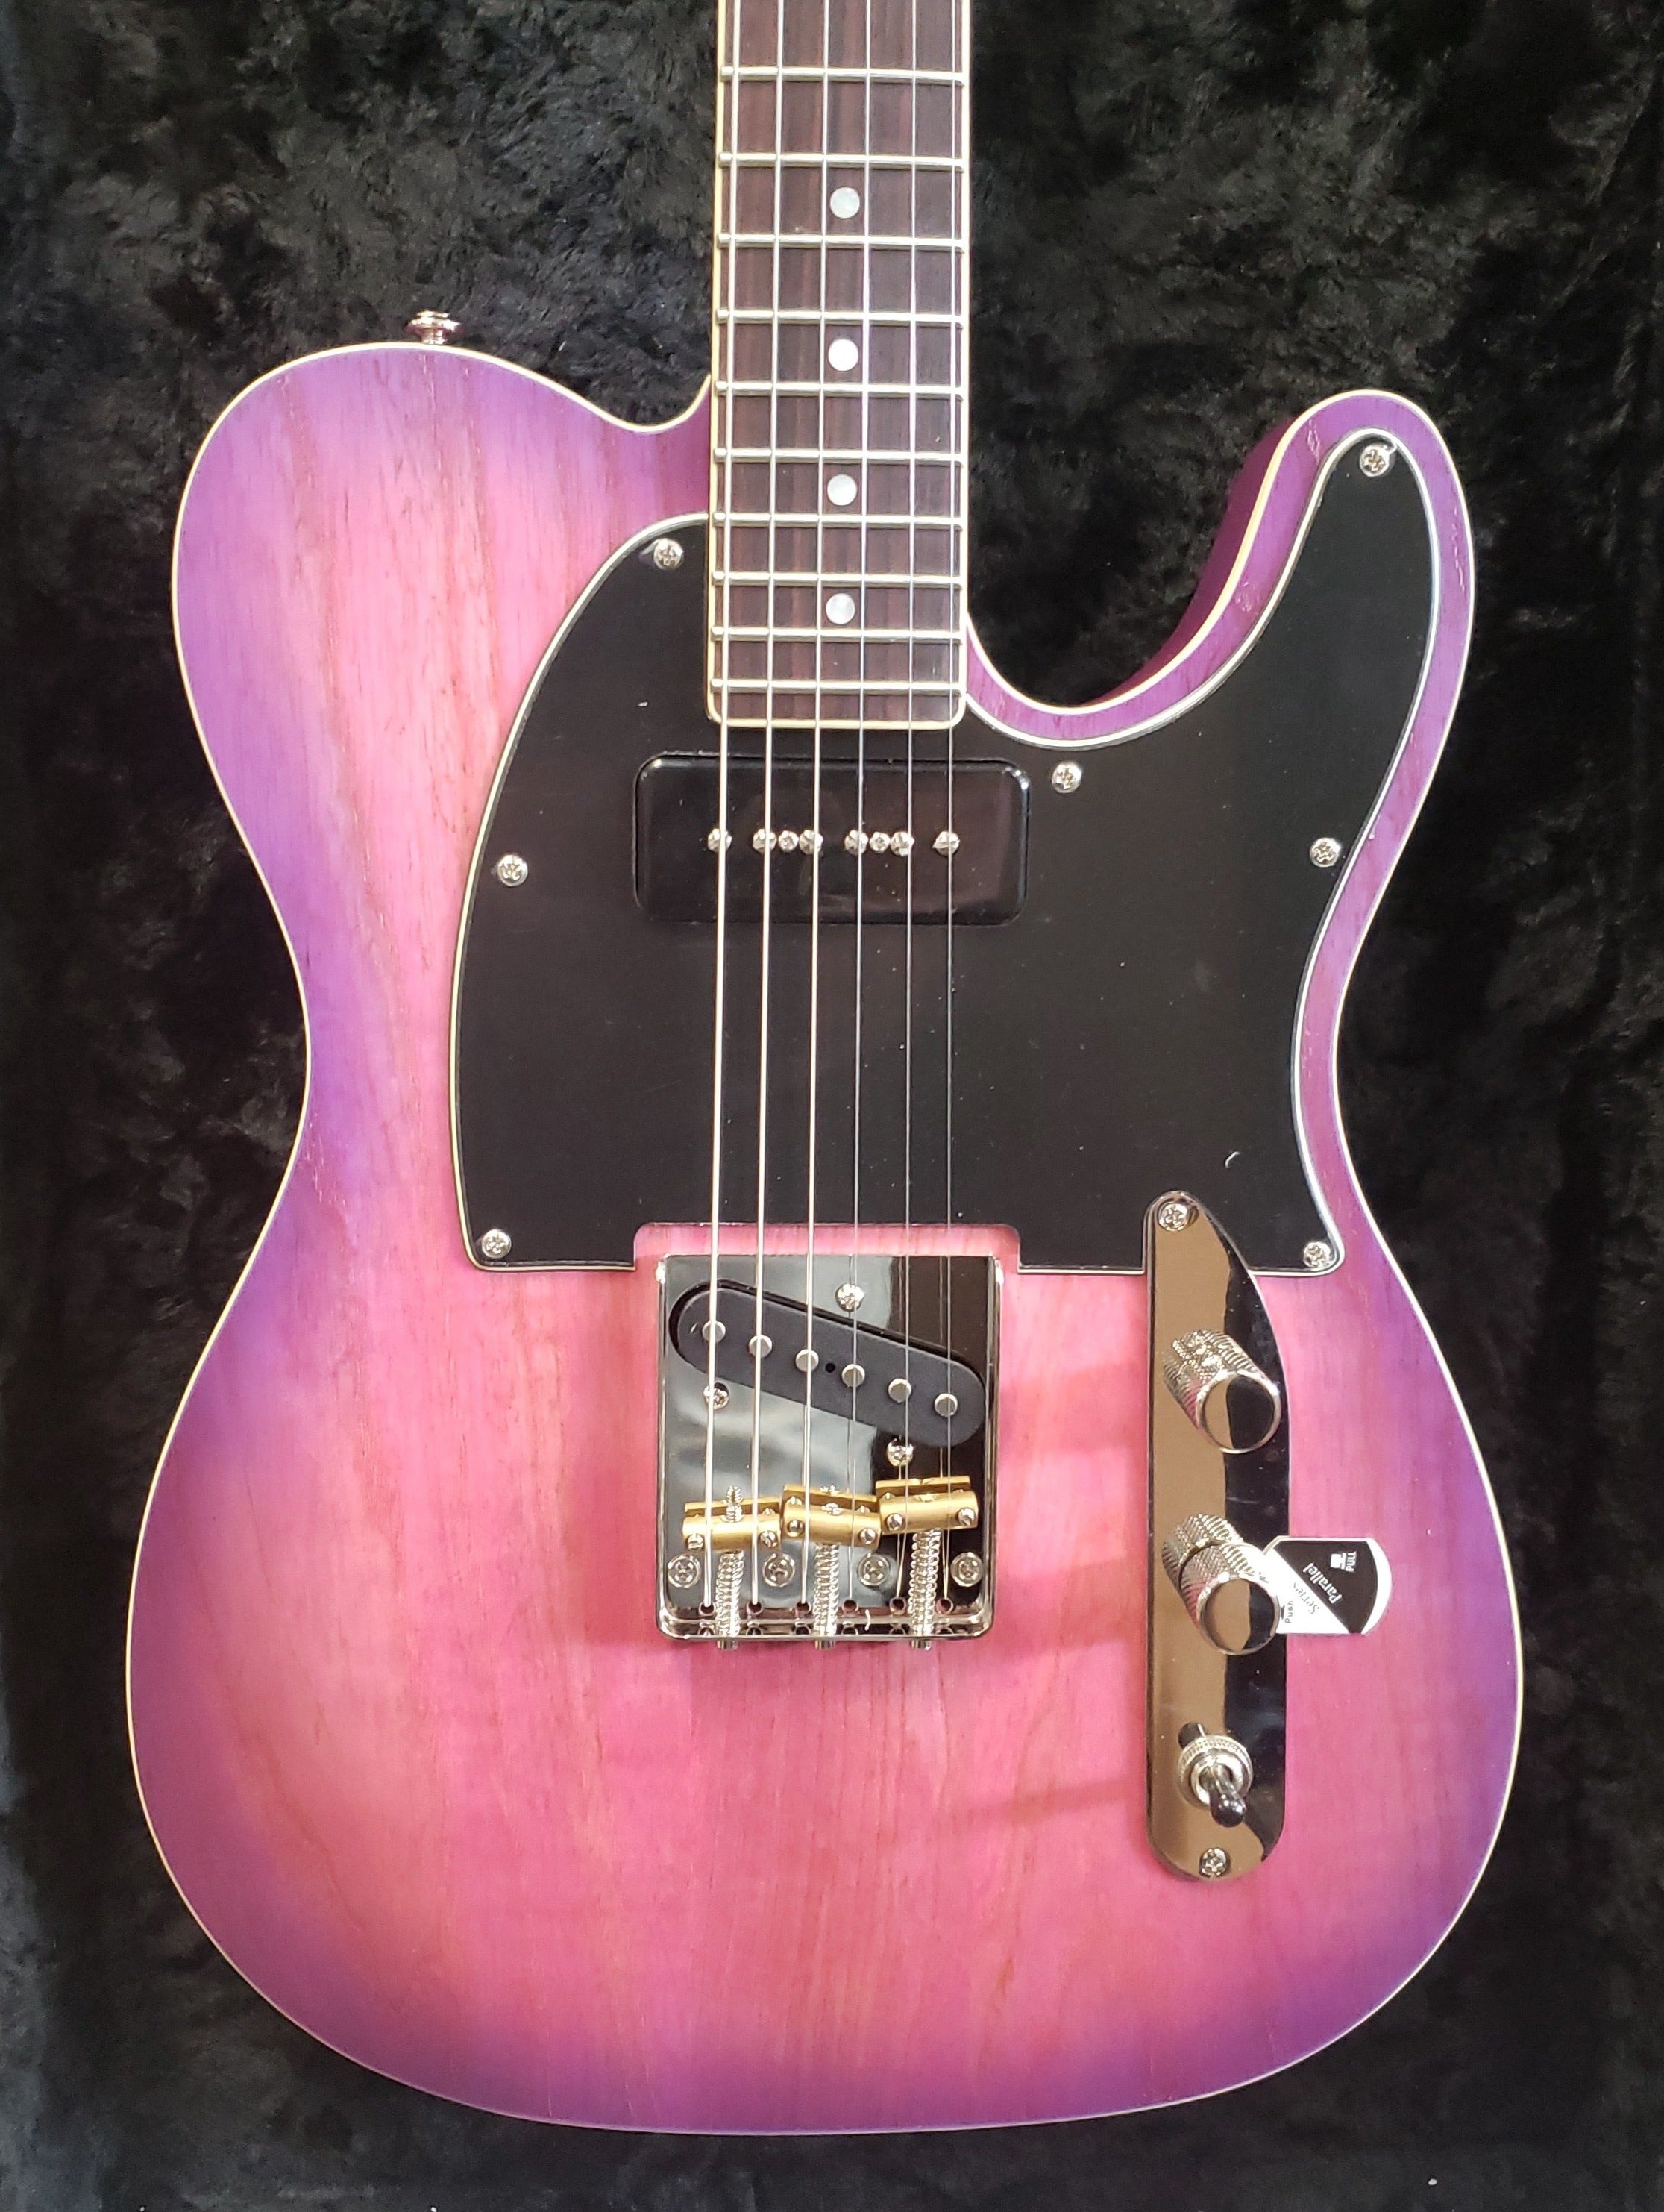 Schecter PT Special Electric Guitar Purple Burst Pearl 667-SHC SERIAL NUMBER W2100473 - 7.0 LBS